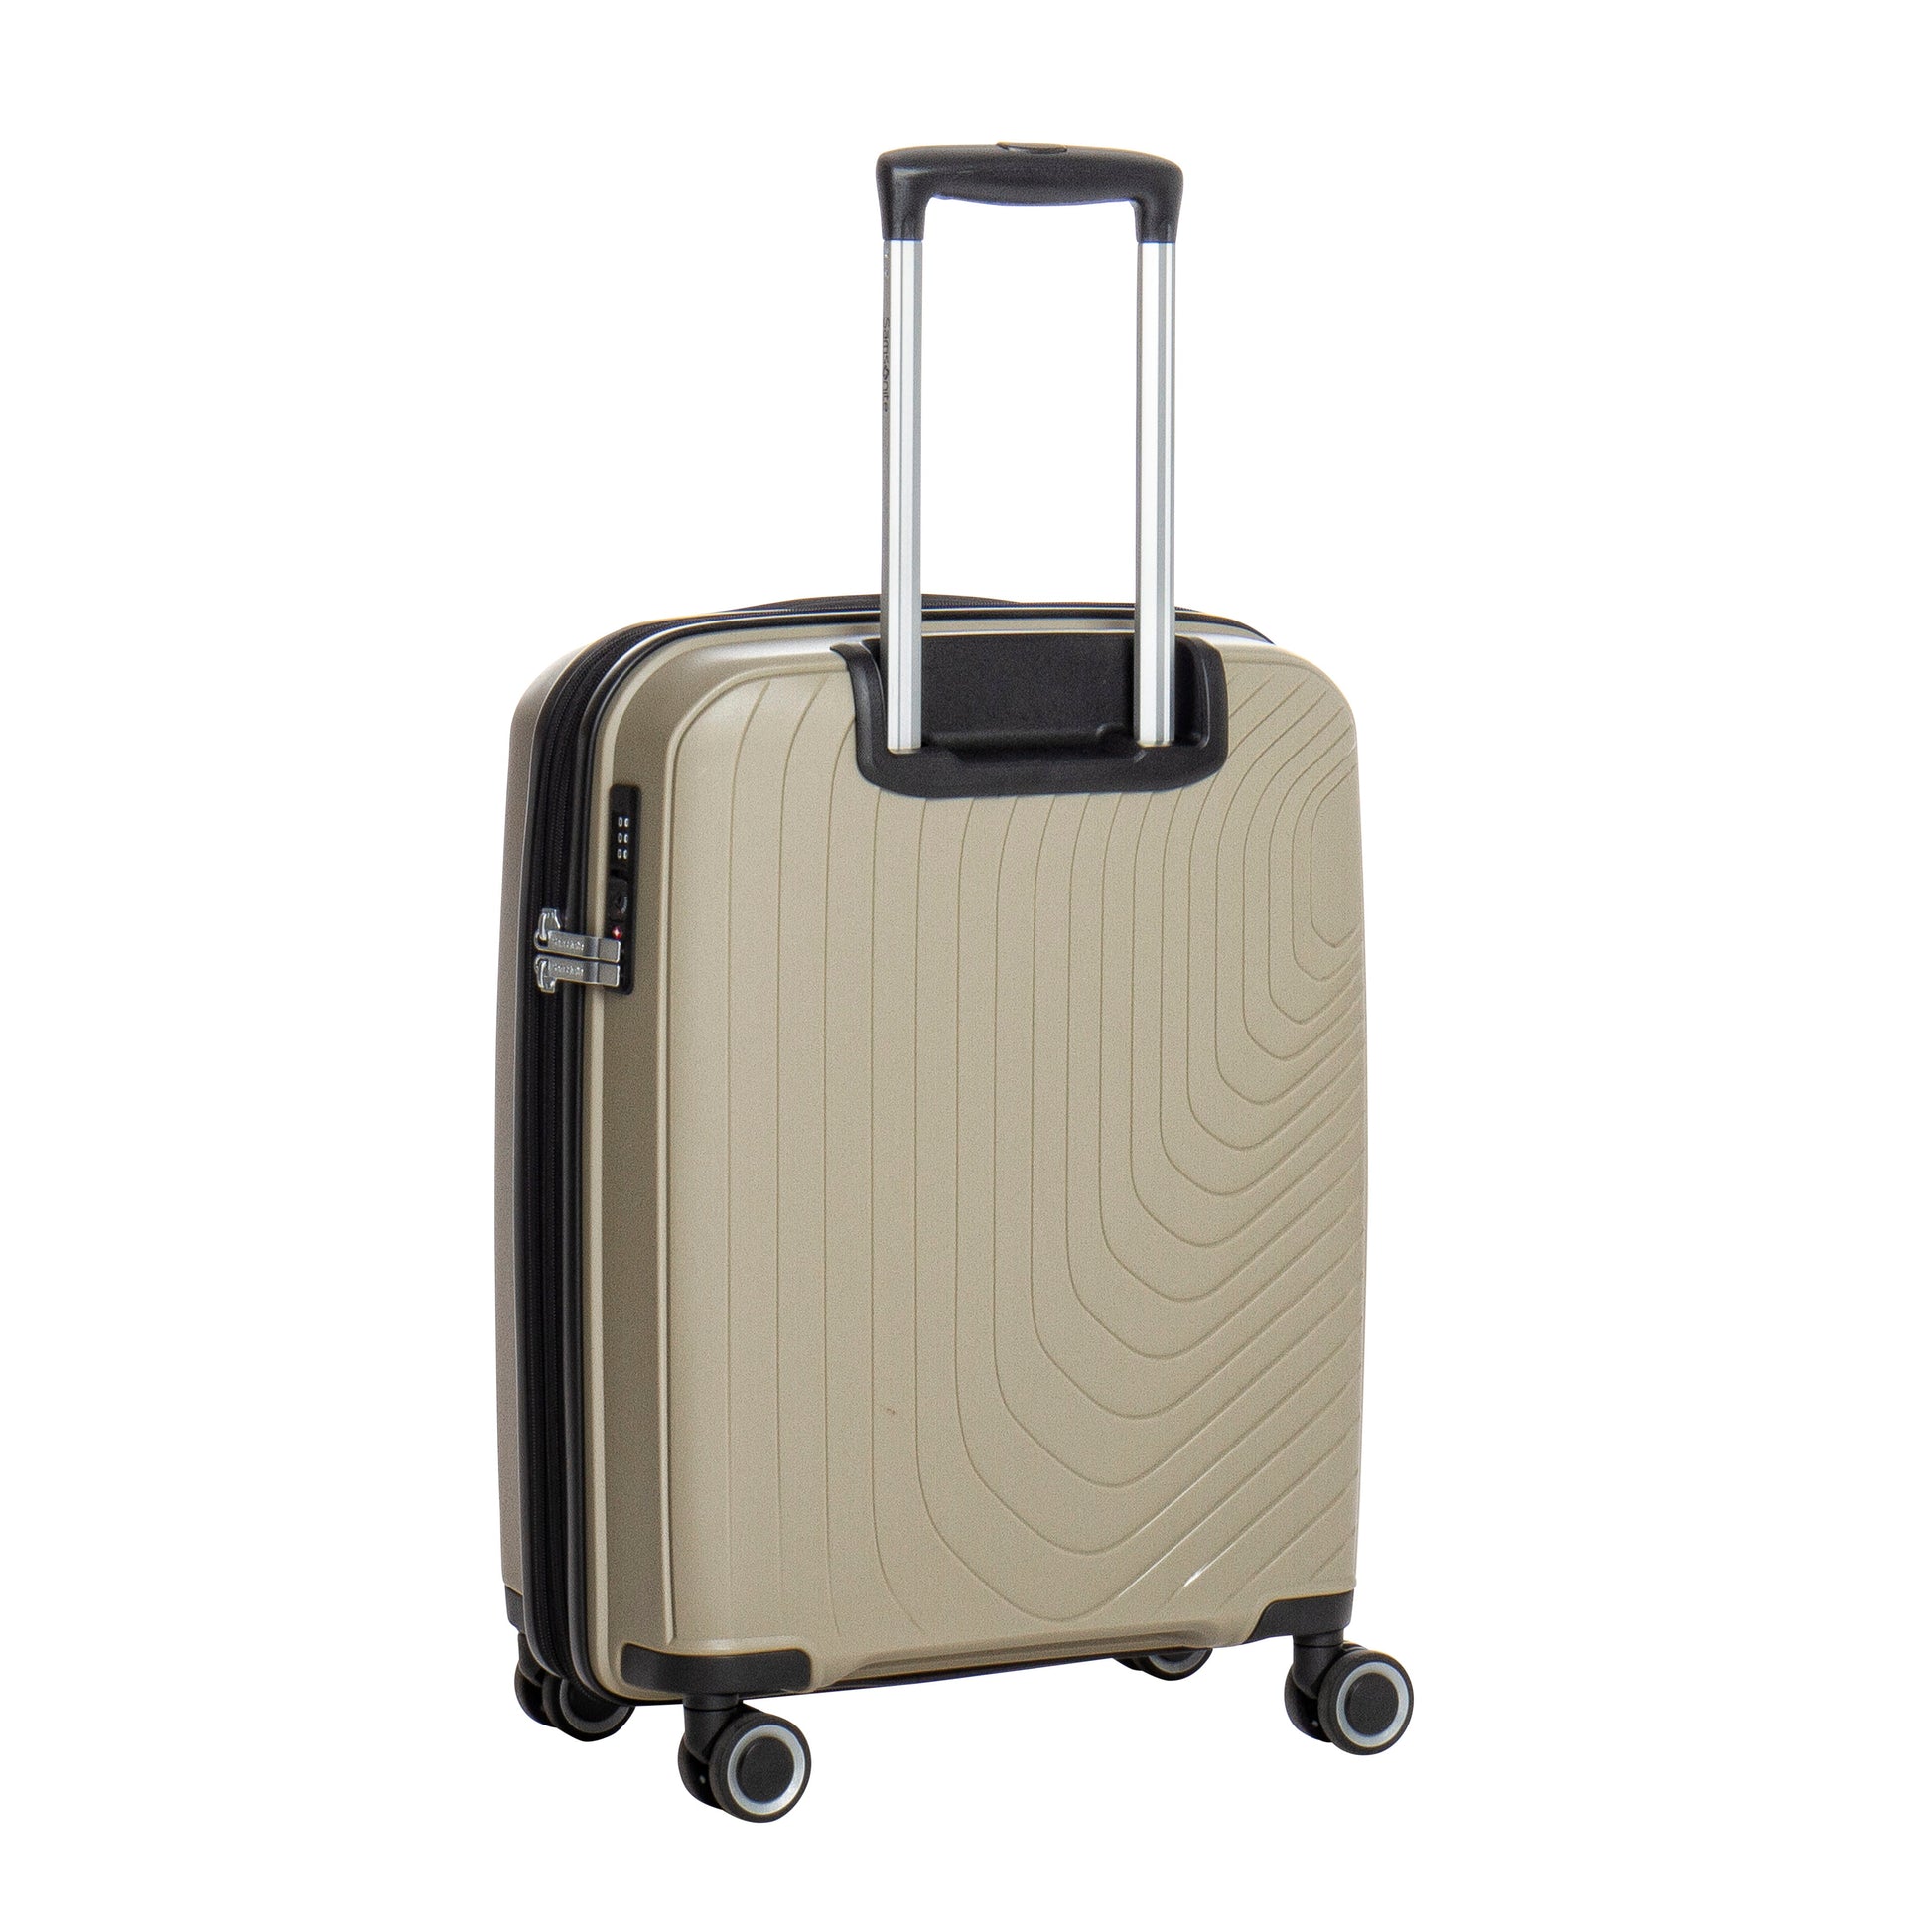 Samsonite  Arrival NXT Spinner Carry-On Luggage